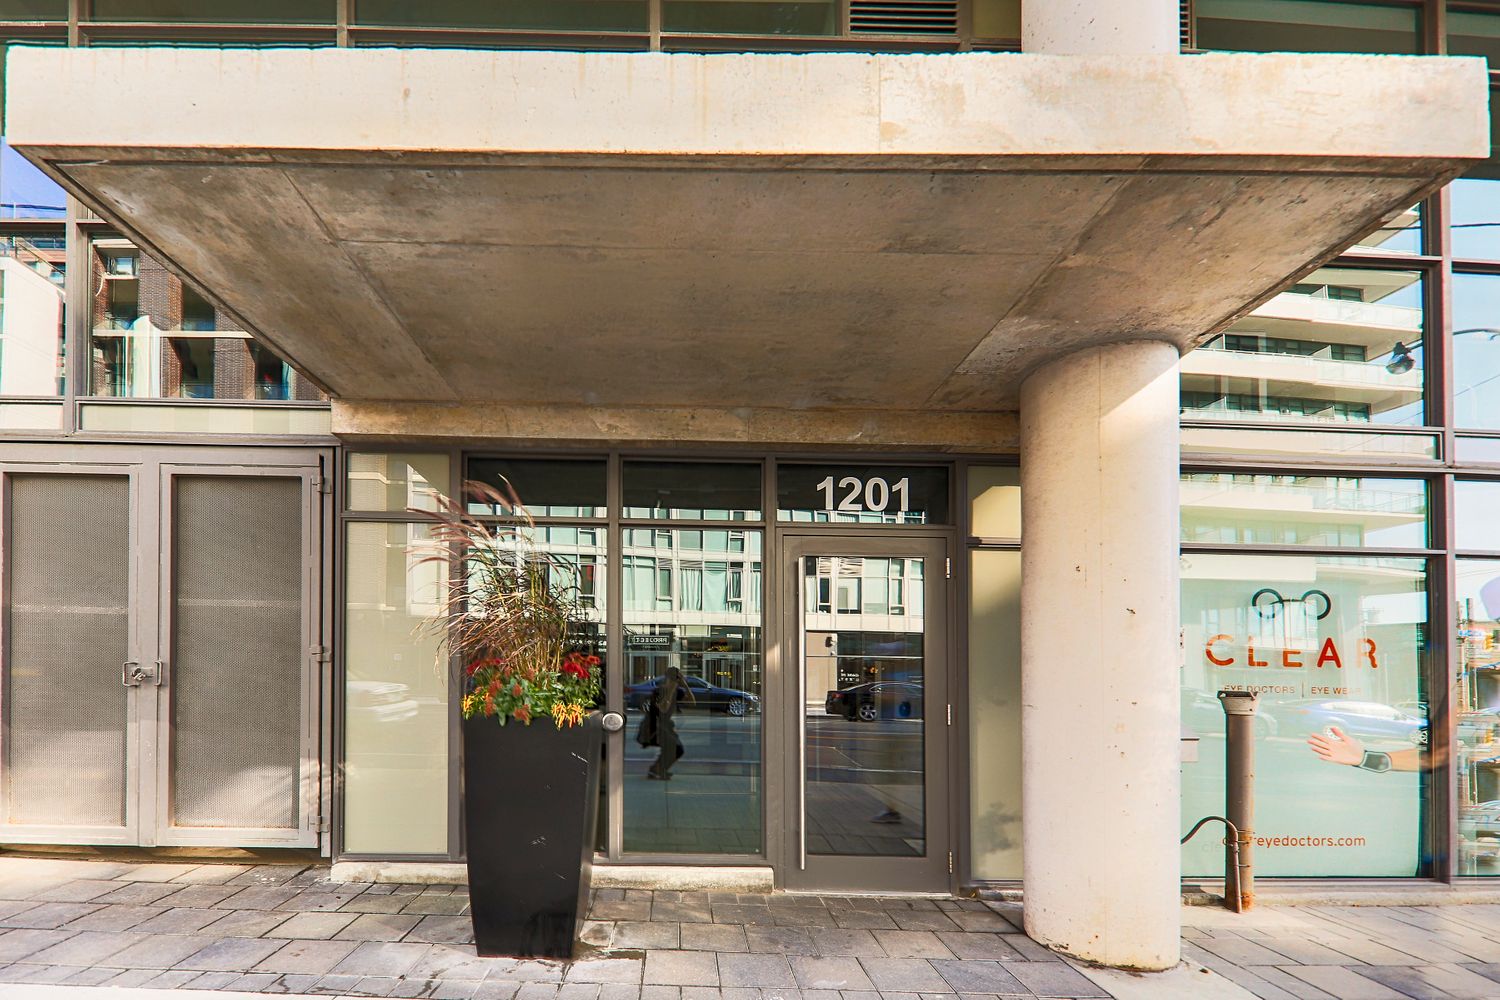 1201 Dundas Street E. Flatiron Lofts is located in  East End, Toronto - image #3 of 4